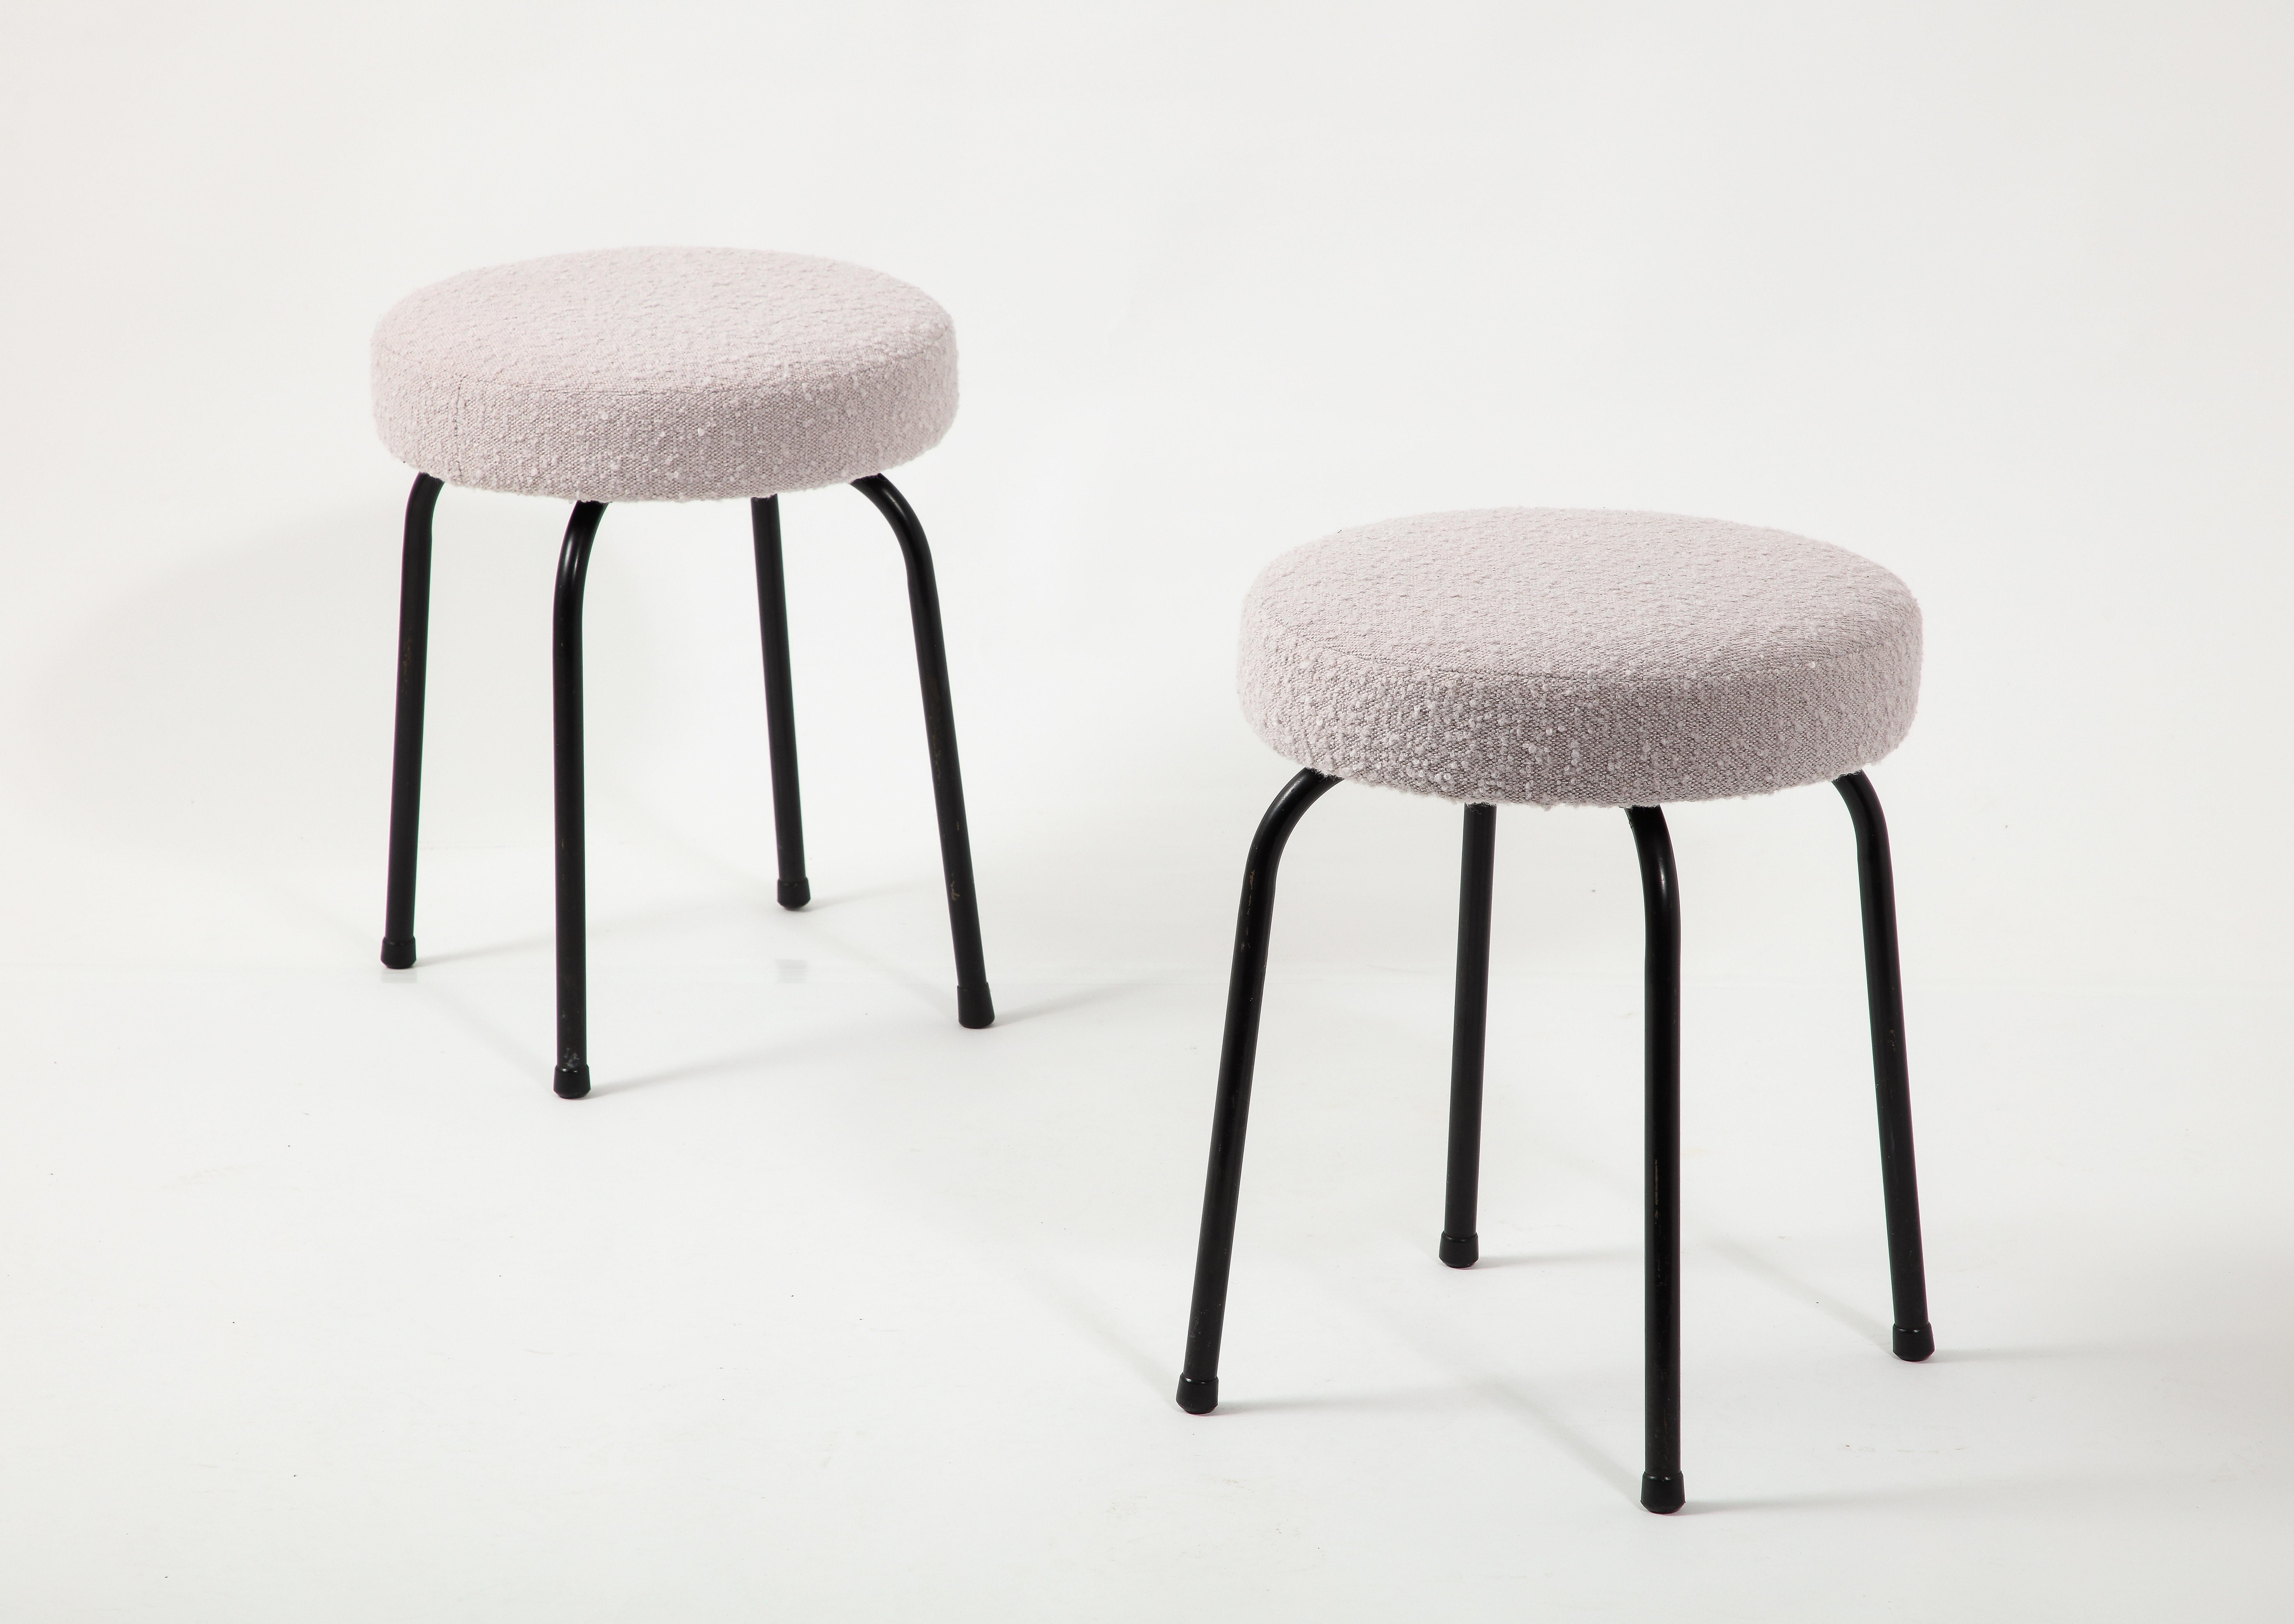 Pair of Boucle & Black Steel Stools, France 1950's For Sale 2